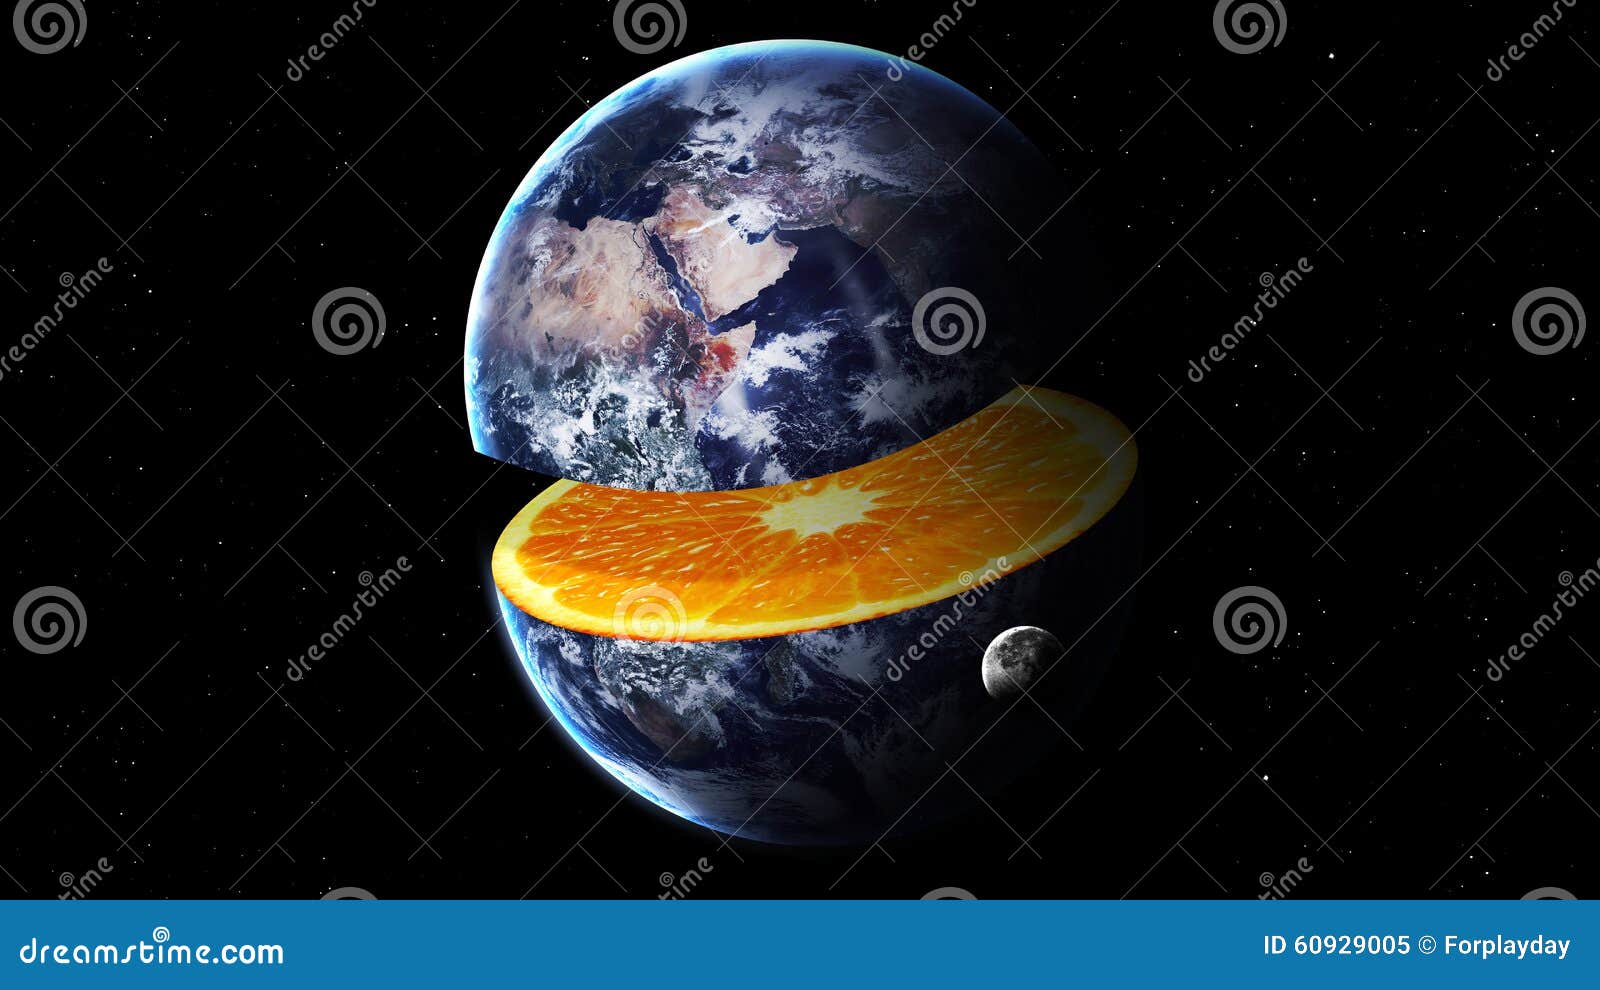 High Resolution Image Of Earth As Orange In Space Editorial Image Illustration Of Planets Night 60929005